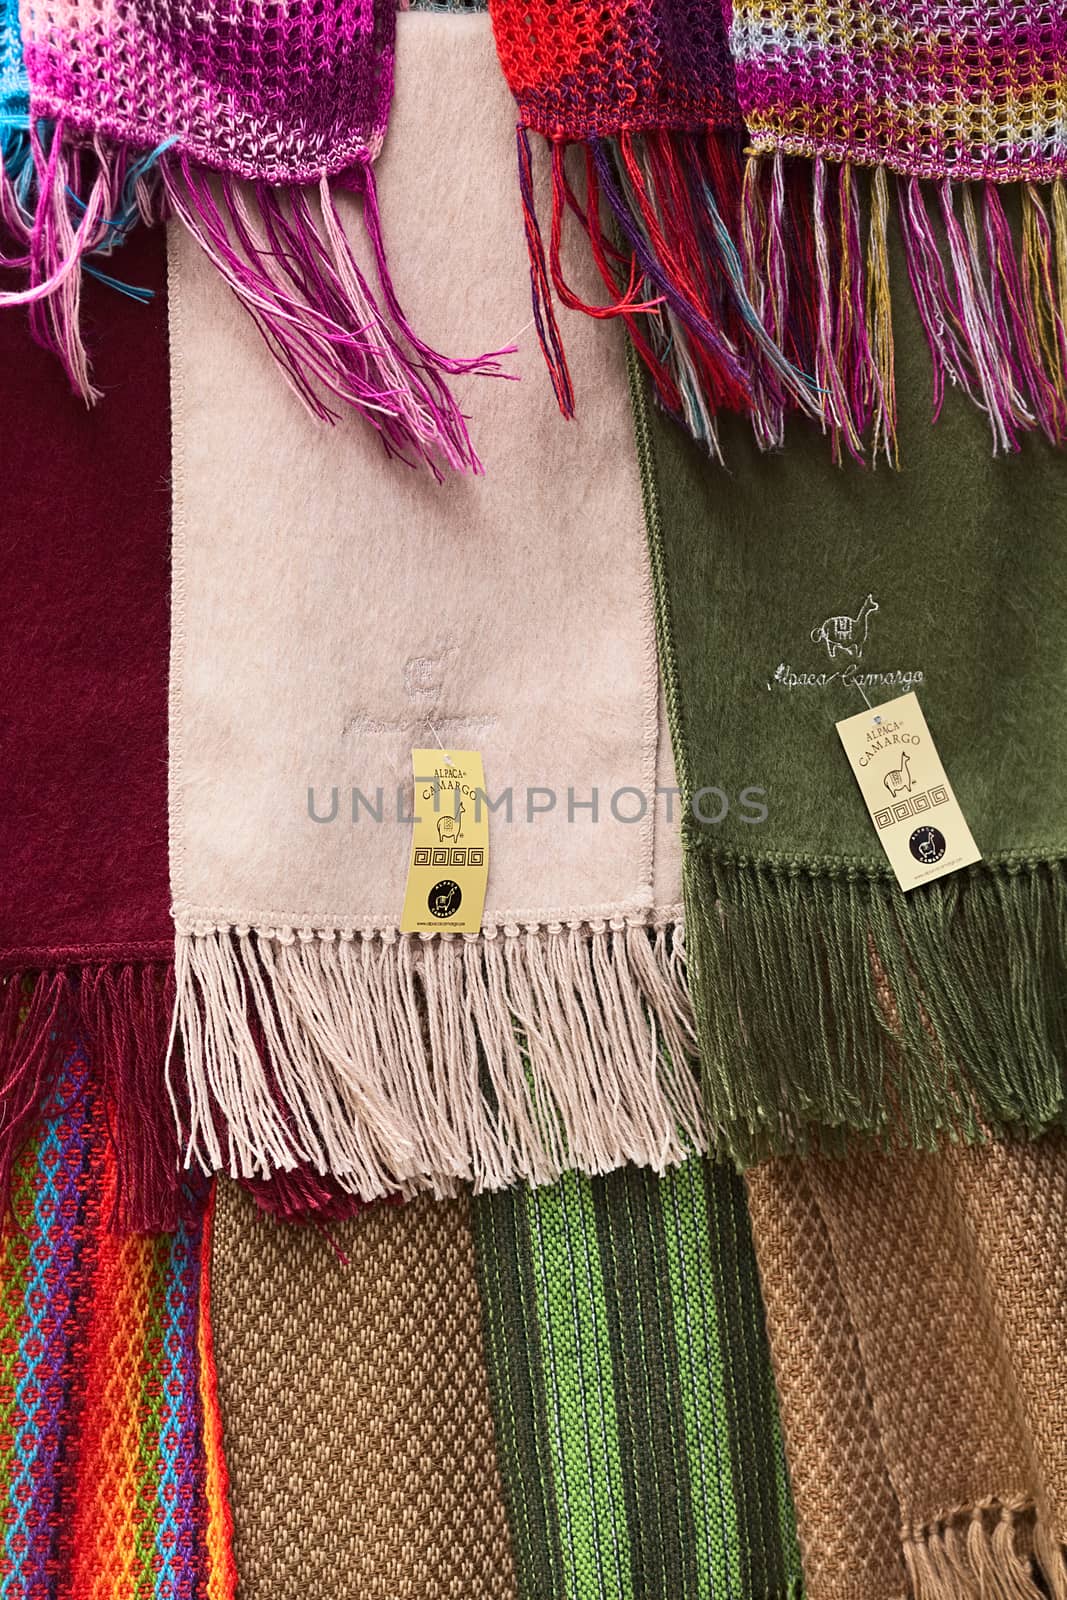 LA PAZ, BOLIVIA - NOVEMBER 10, 2014: Alpaca scarves hanging at a shop on Linares street in the city center on November 10, 2014 in La Paz, Bolivia